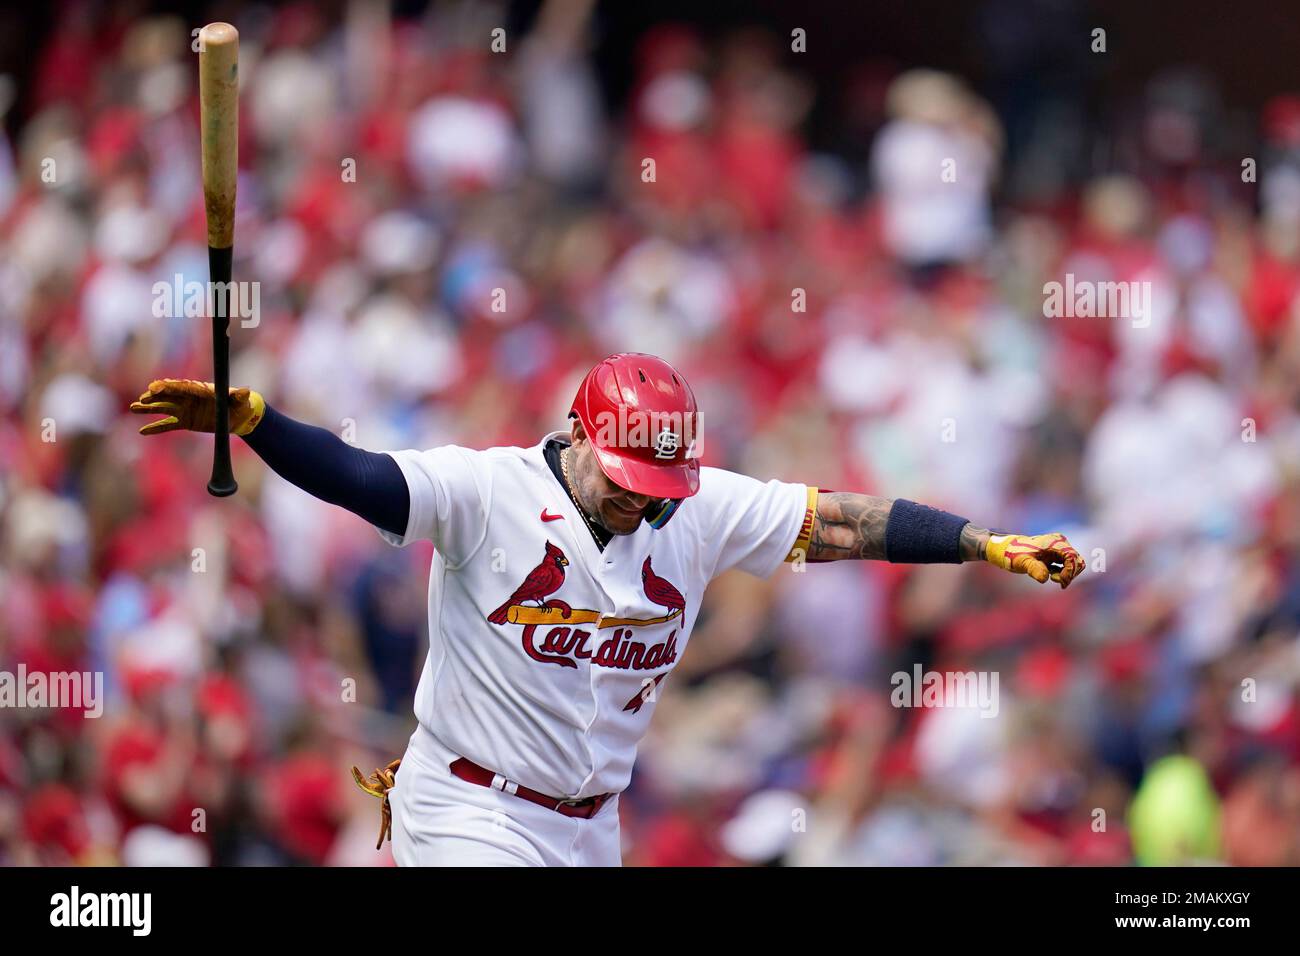 St. Louis Cardinals' Yadier Molina celebrates after hitting a two